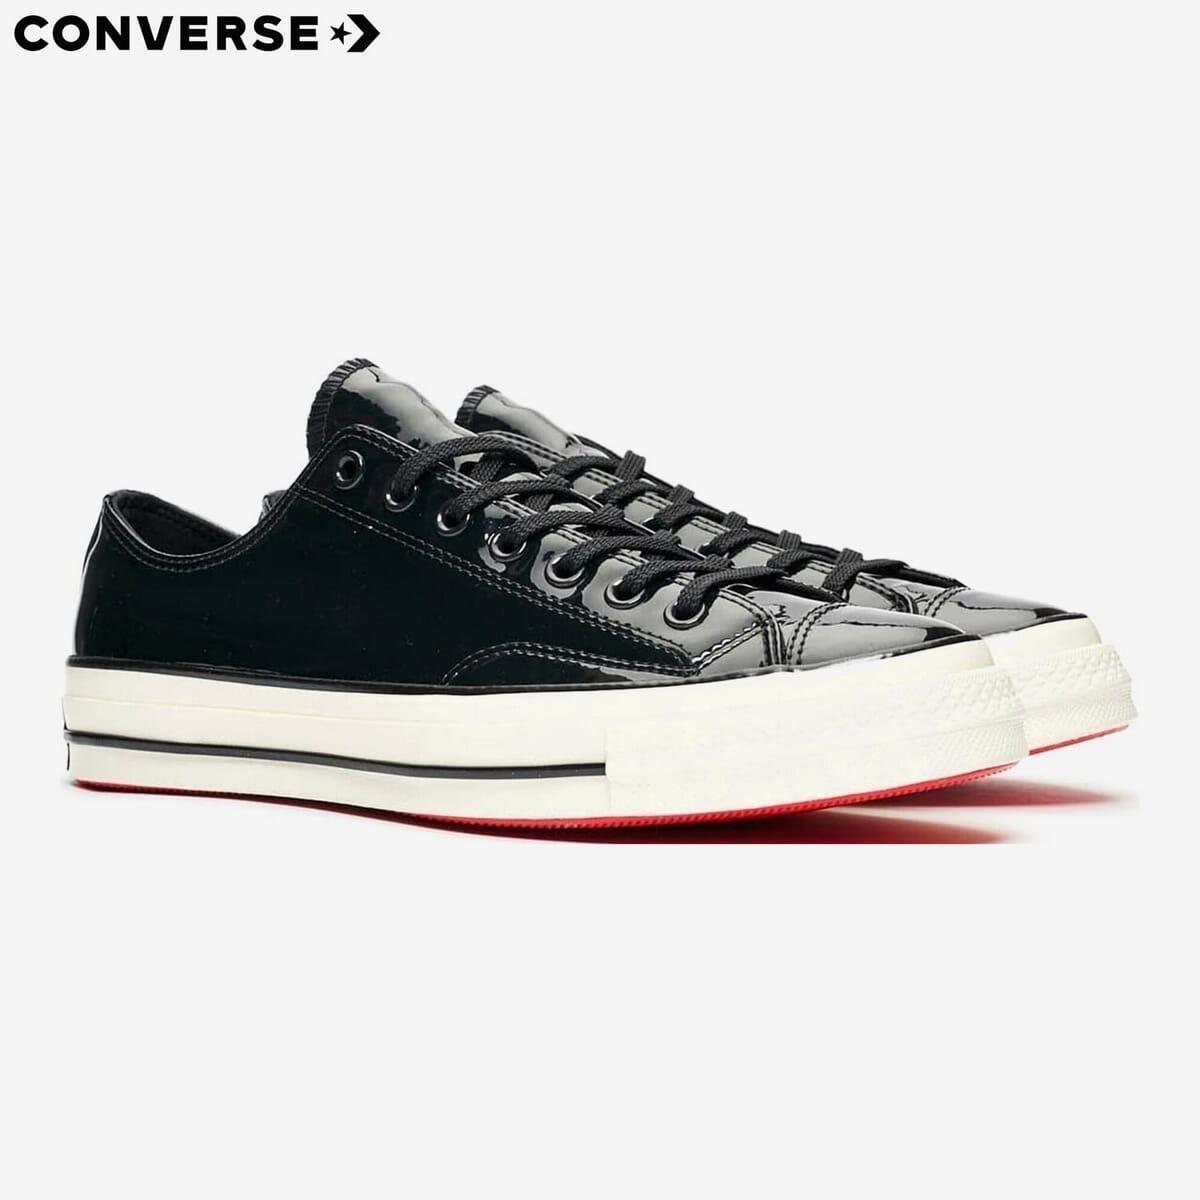 converse chuck taylor all star 70s ox black sneaker for unisex 162438c